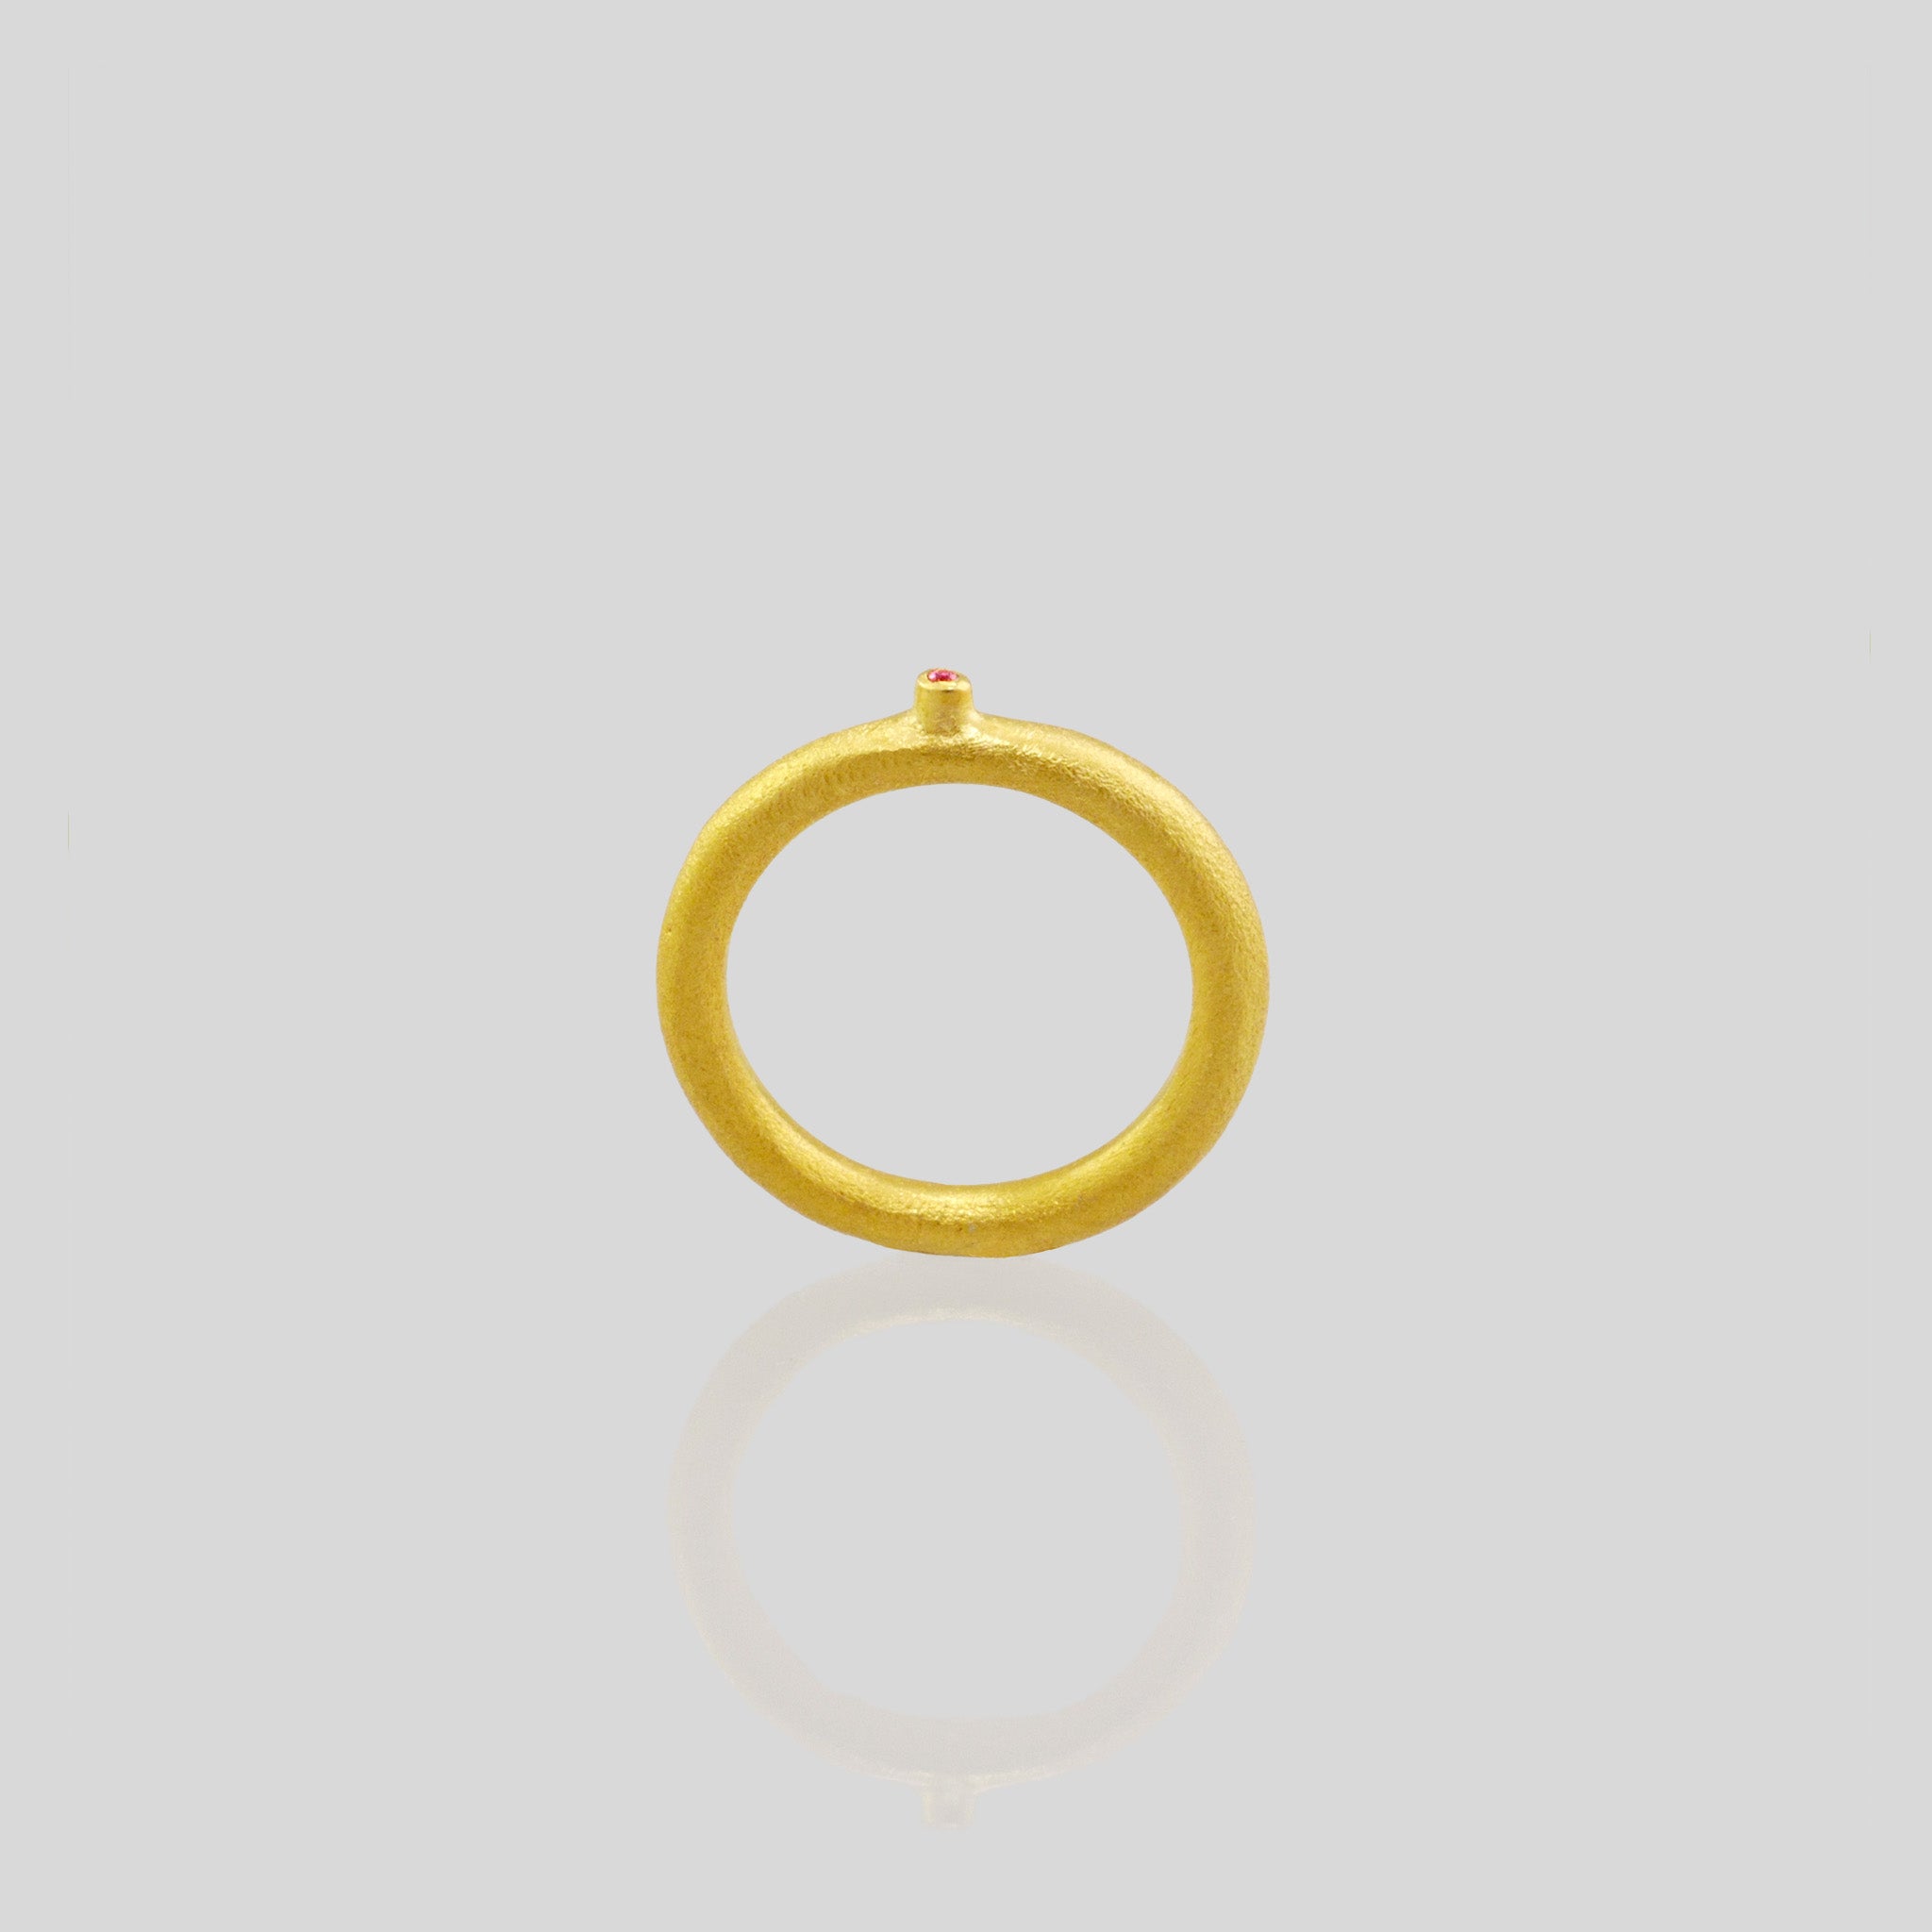 Side view of an 18k Gold Ring with a round matte finish and a slender tentacle extending from it, adorned with an inlaid ruby stone. Inspired by a small slug observed on the porch, the design exudes a delicate, natural charm with a playful touch.